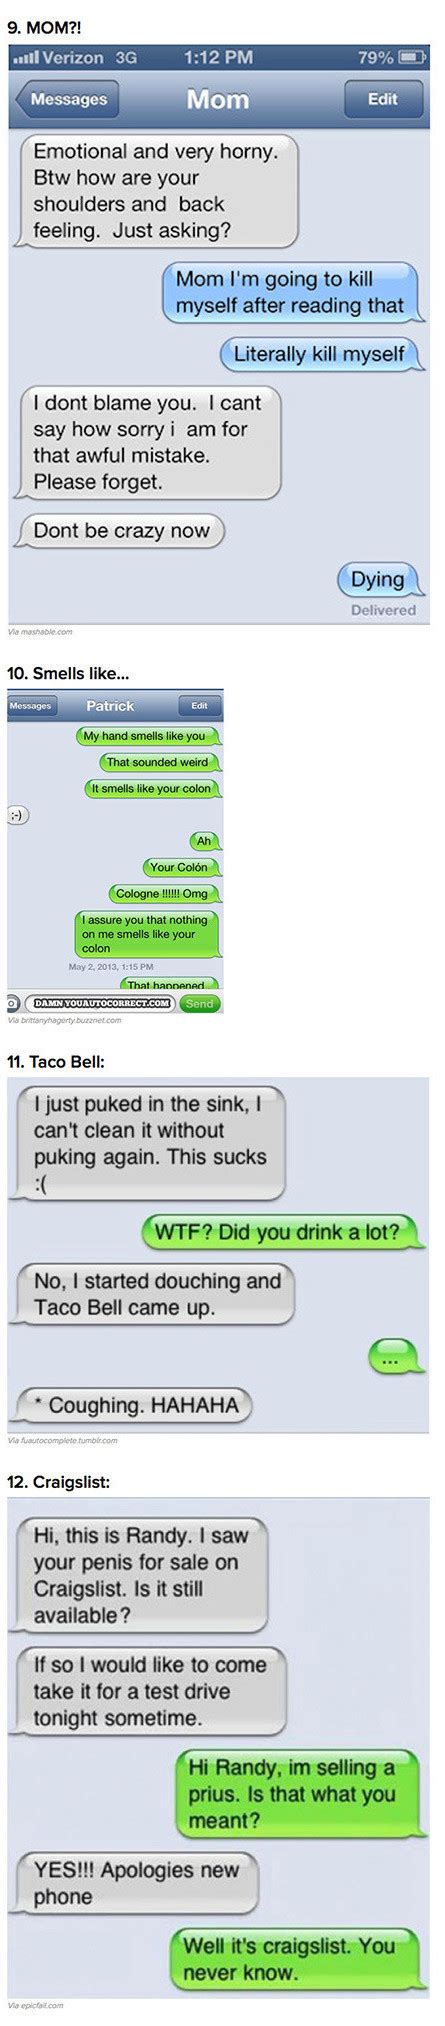 12 of the most awkward text messages sent thanks to auto correct